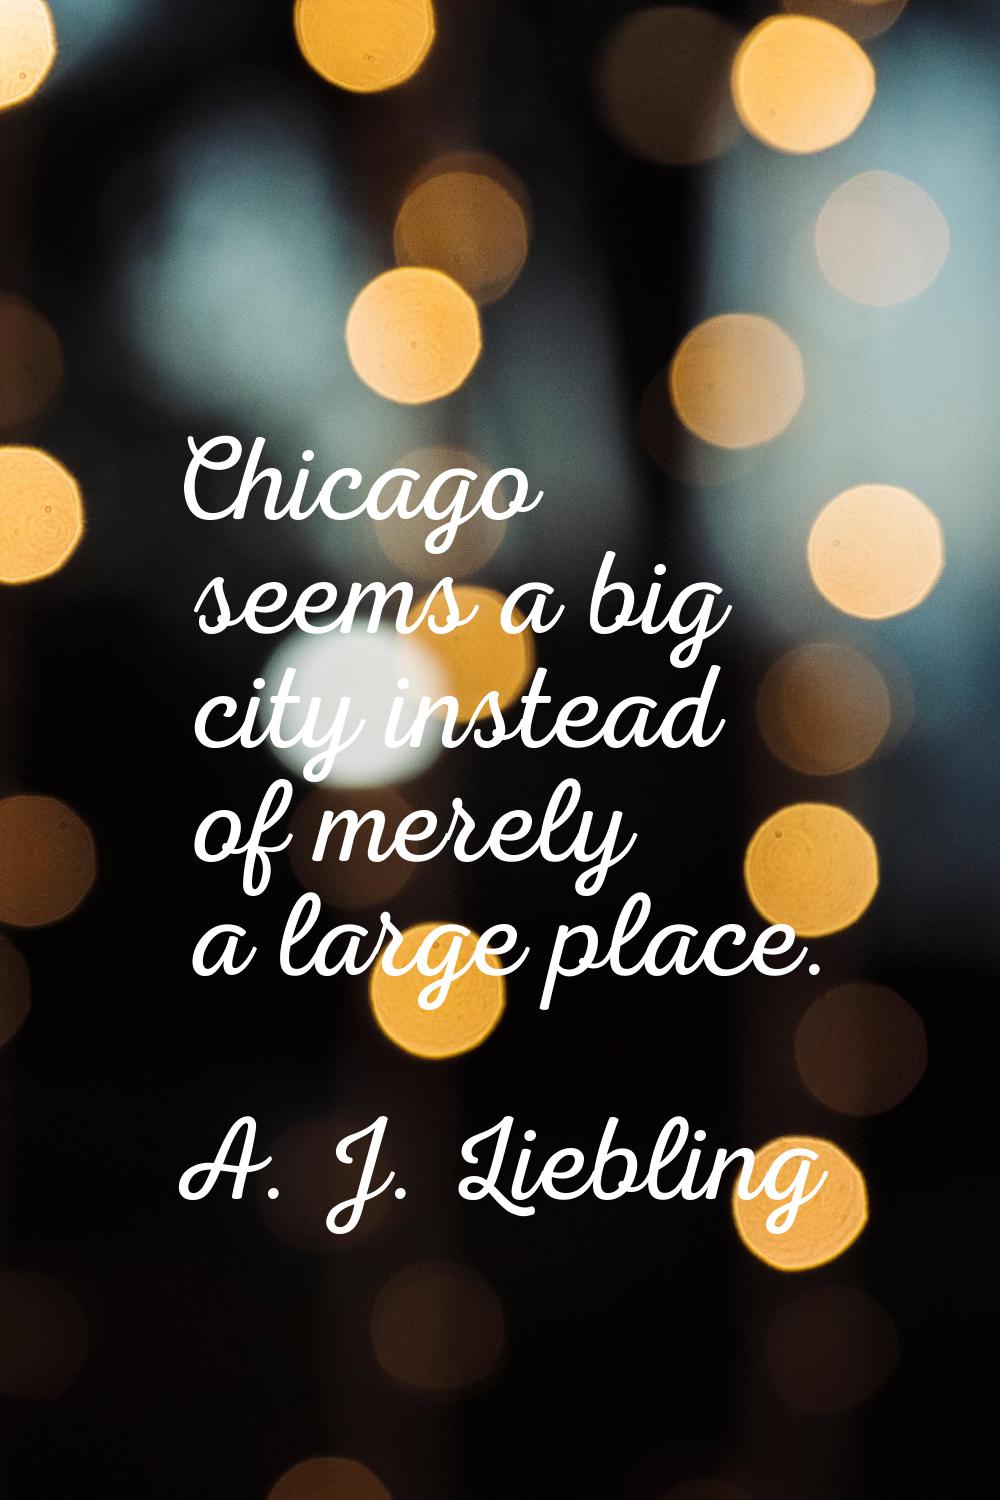 Chicago seems a big city instead of merely a large place.